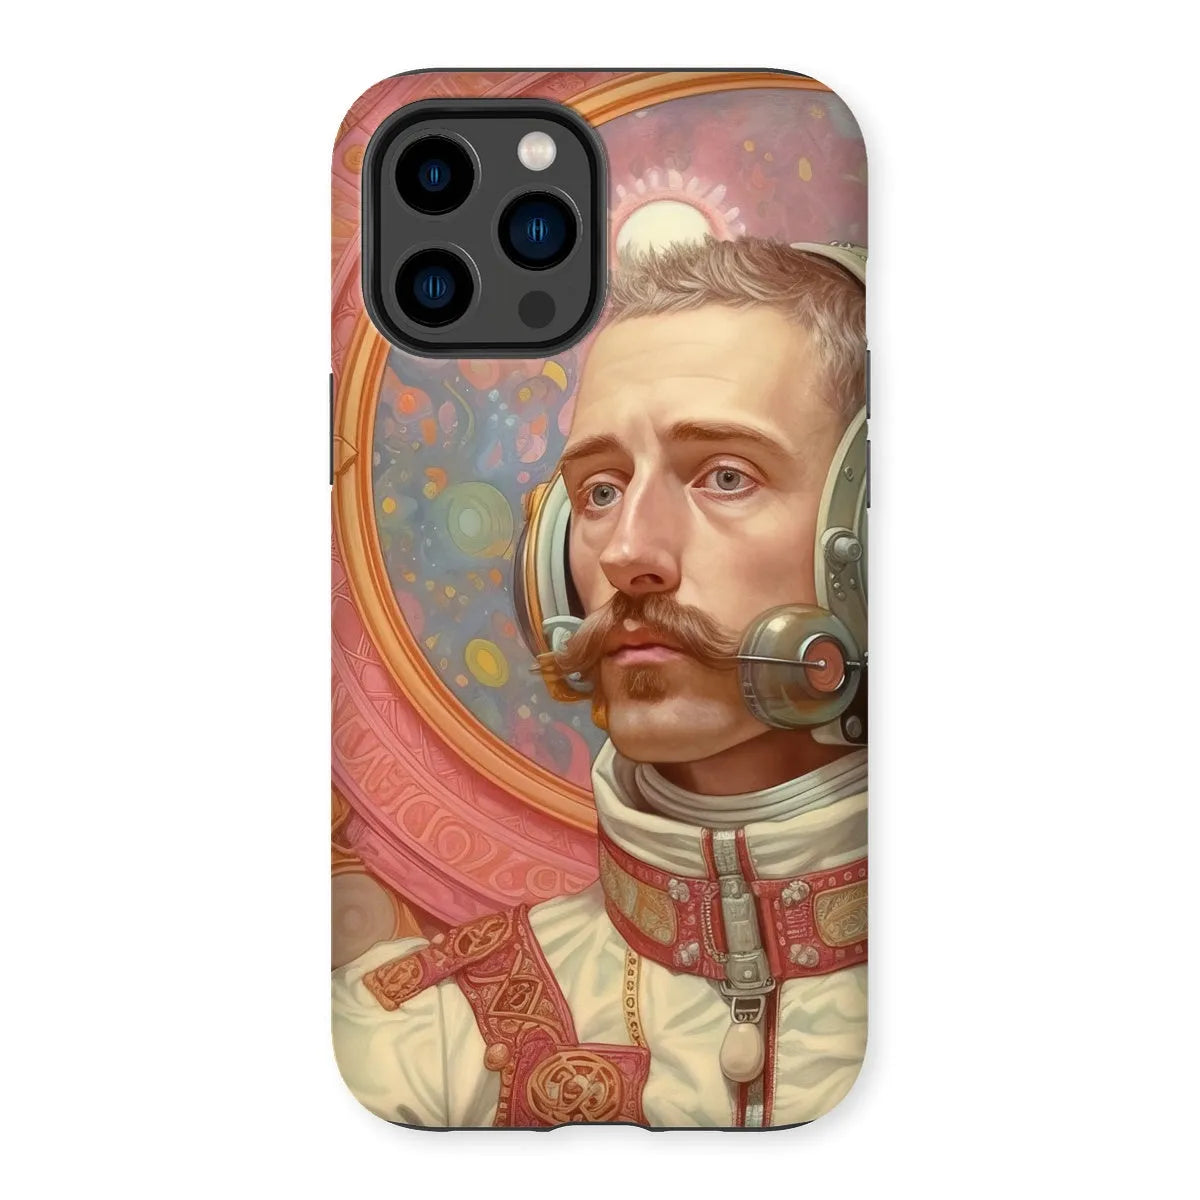 Axel The Gay Astronaut - Gay Aesthetic Art Phone Case - Iphone 14 Pro Max / Matte - Mobile Phone Cases - Aesthetic Art